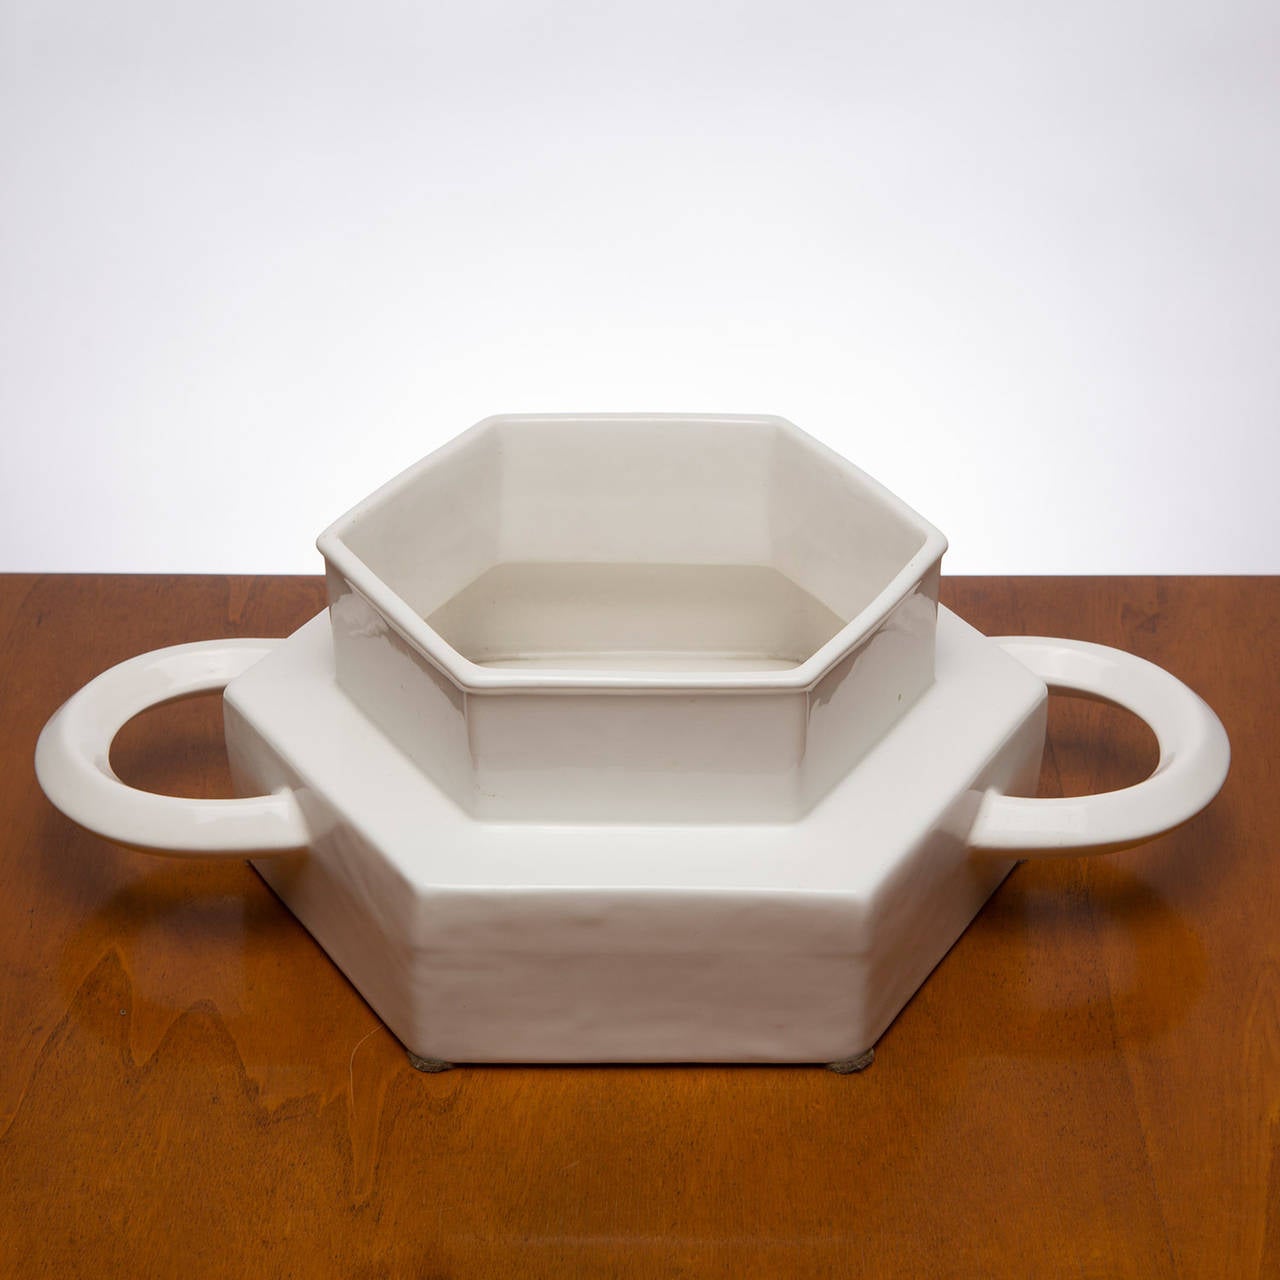 Huge ceramic centerpiece by Gabbianelli.
Oversized handles and pure sculptural shape.